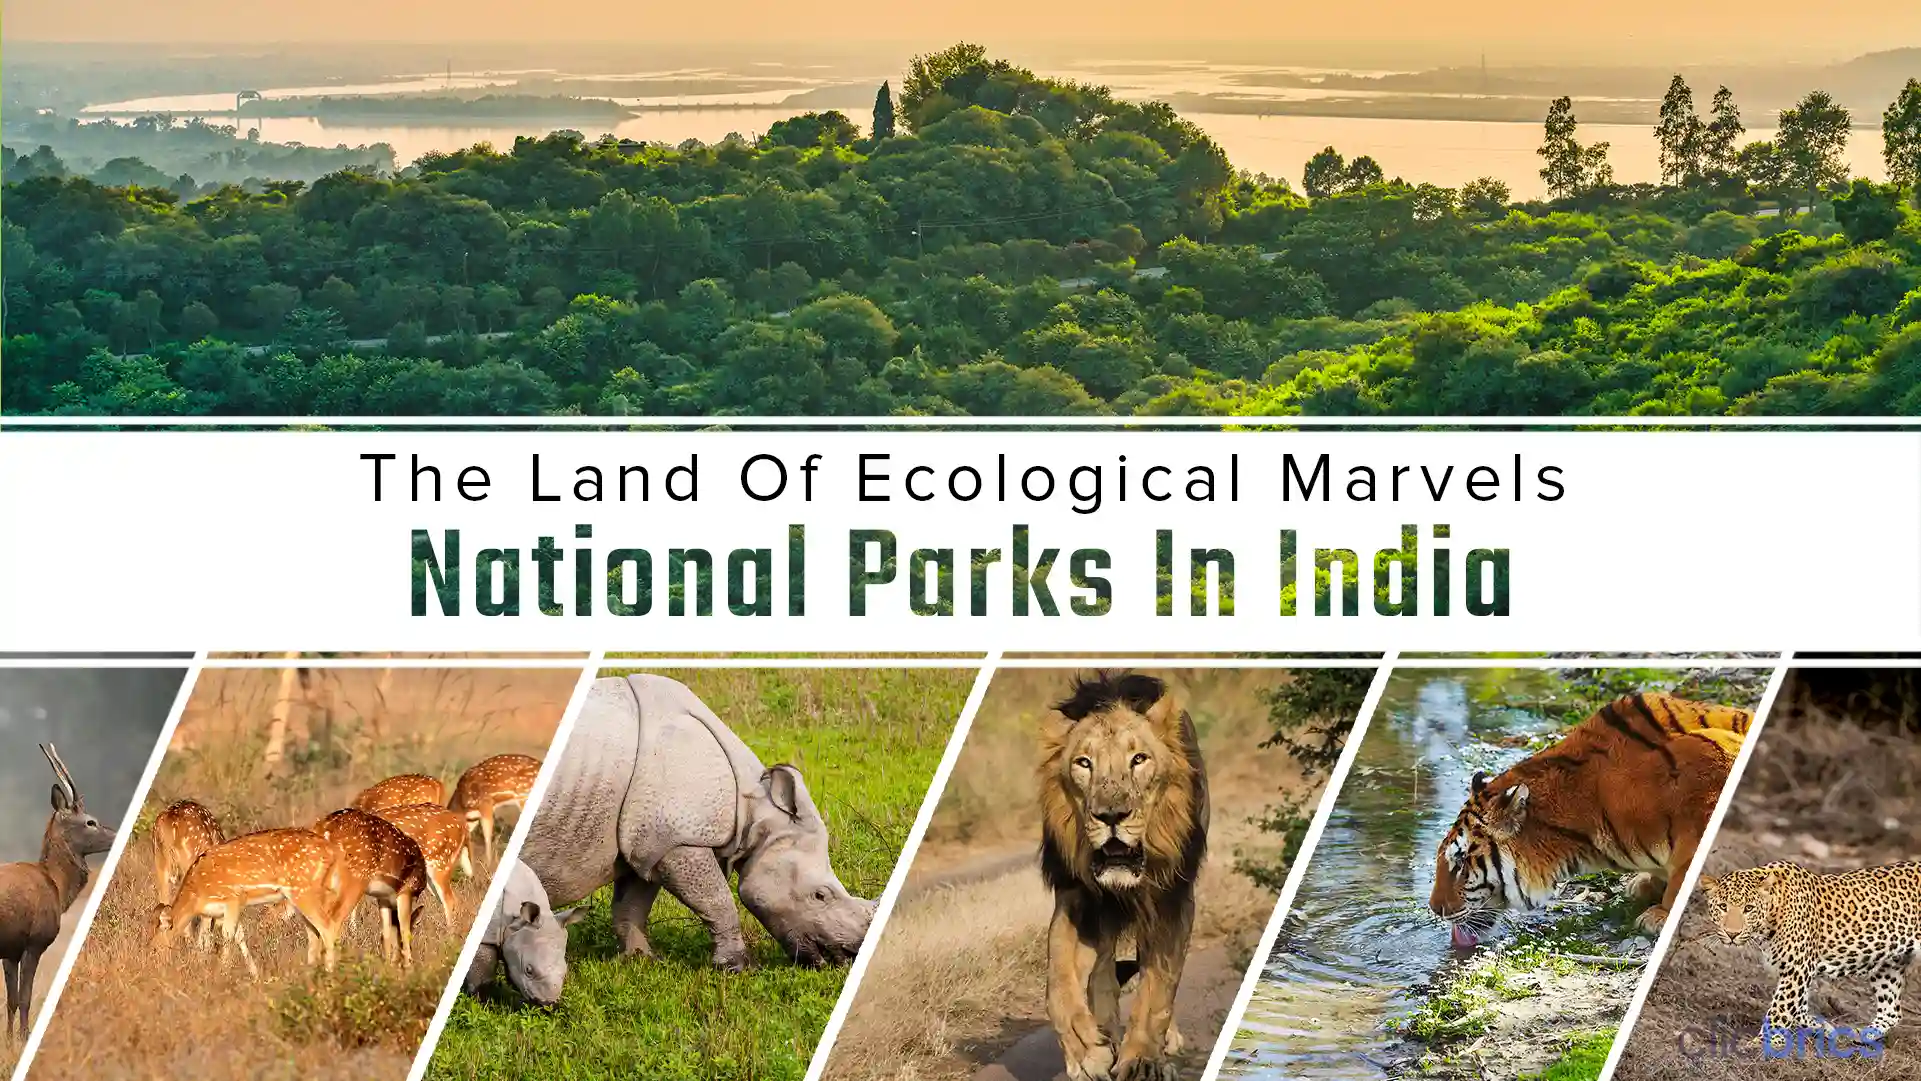 India's National Parks